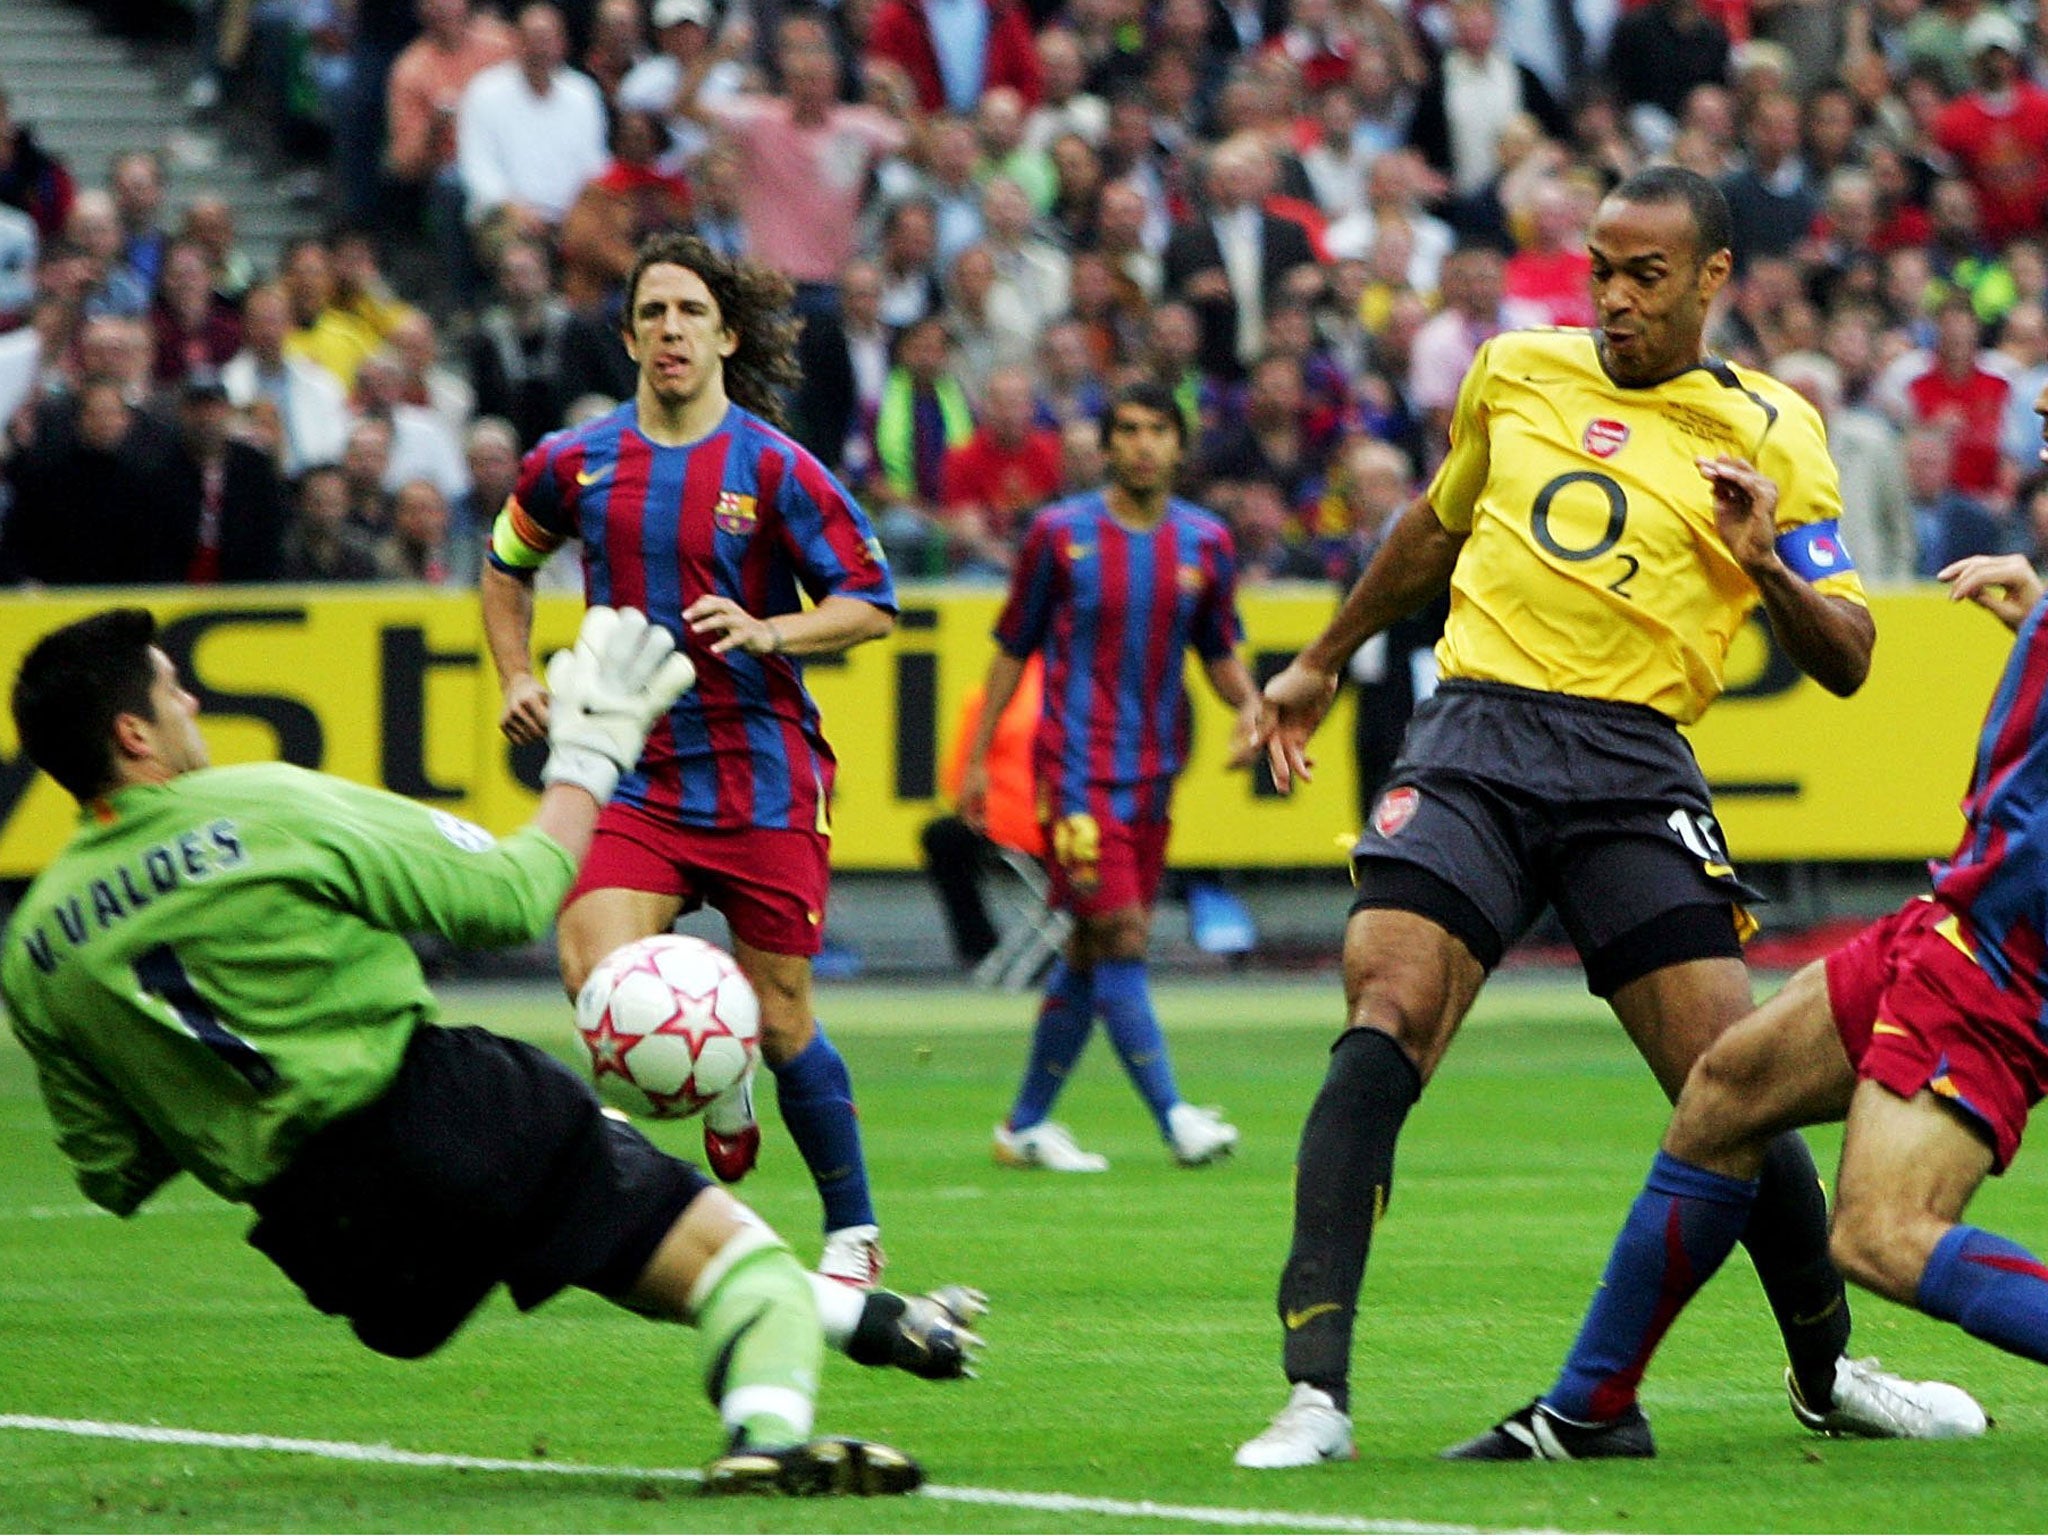 Barcelona’s Victor Valdes saves from Arsenal’s Thierry Henry during the 2006 Champions League final